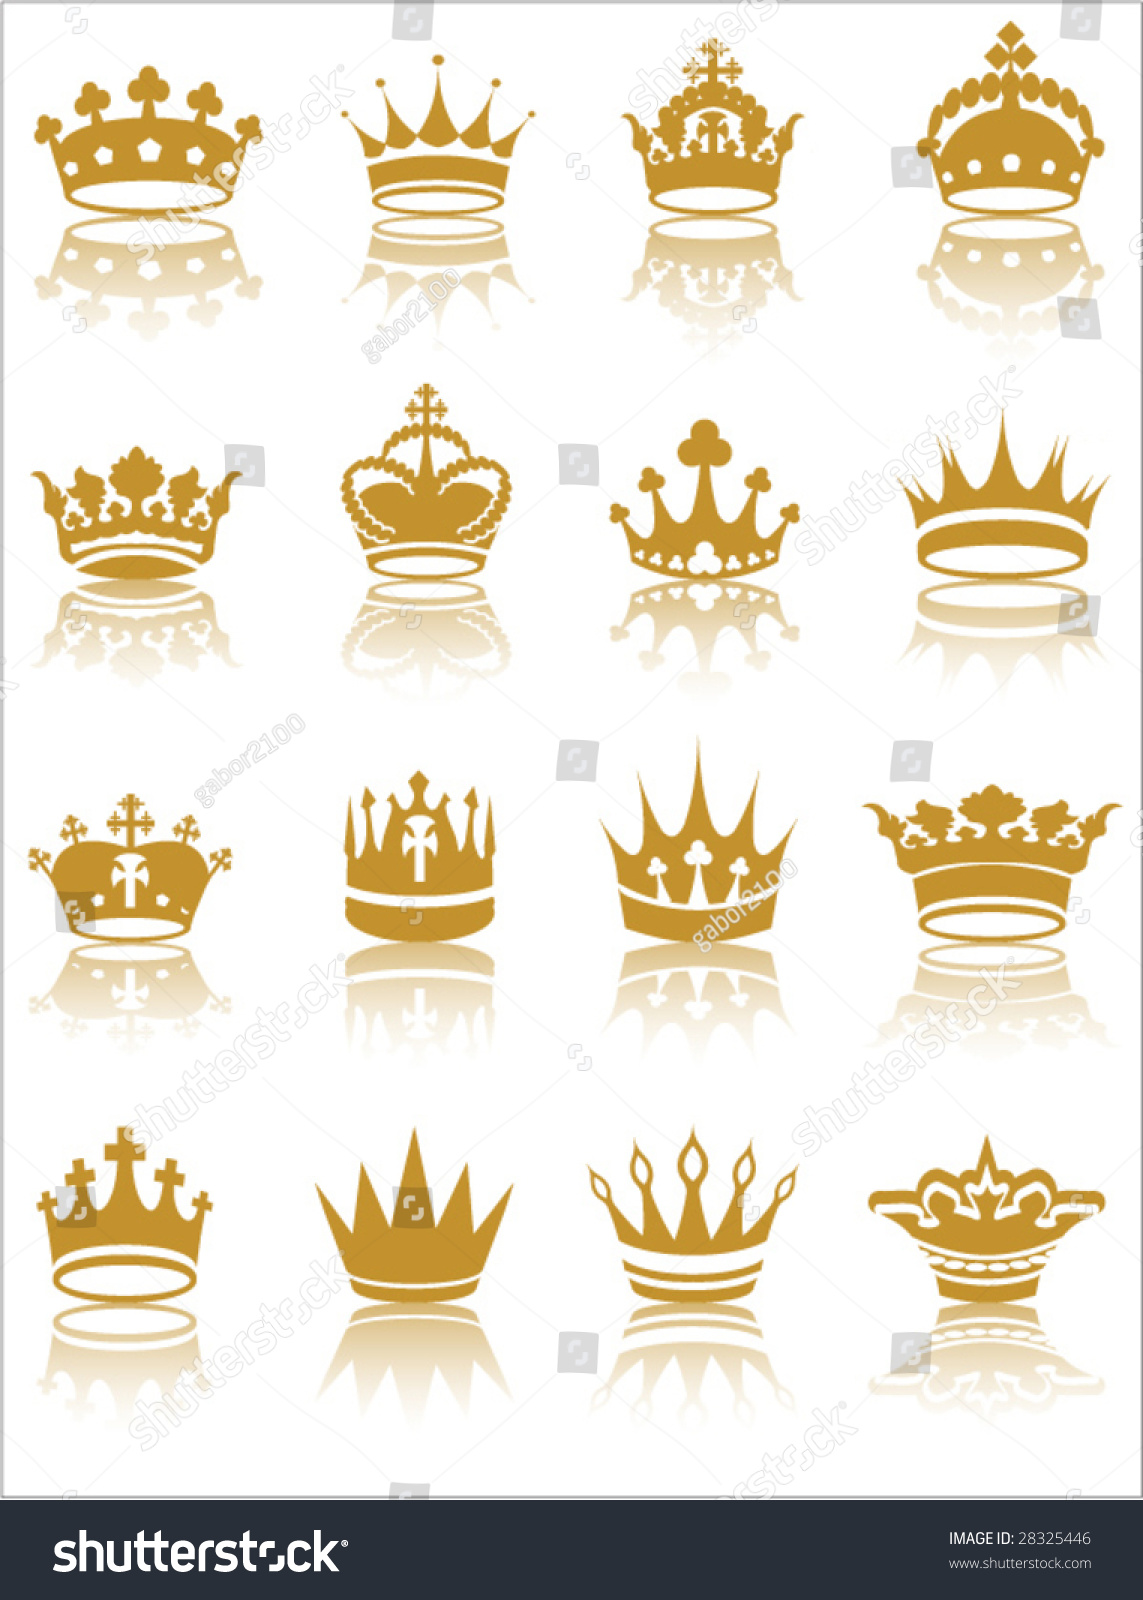 Download Gold Crown Collection Vector Illustration เวกเตอร์สต็อก ...